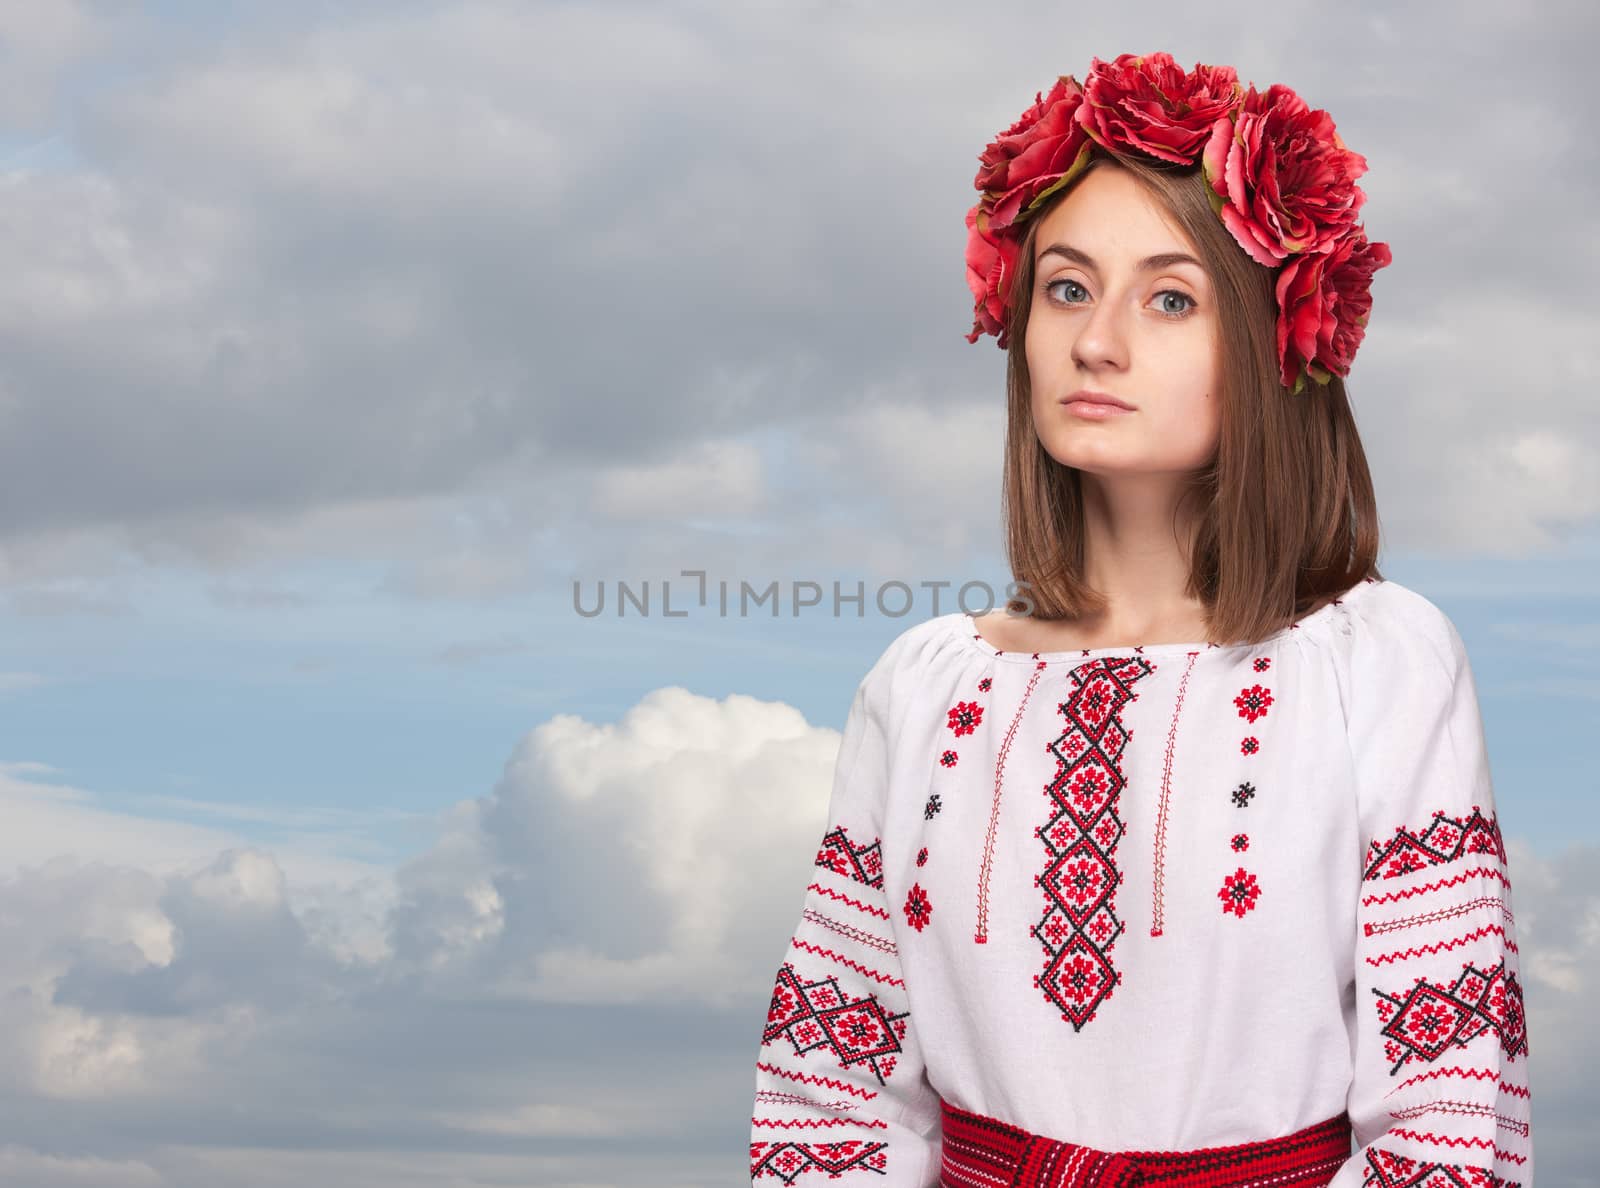 Beautiful sad girl in the Ukrainian national suit against the cloudy sky